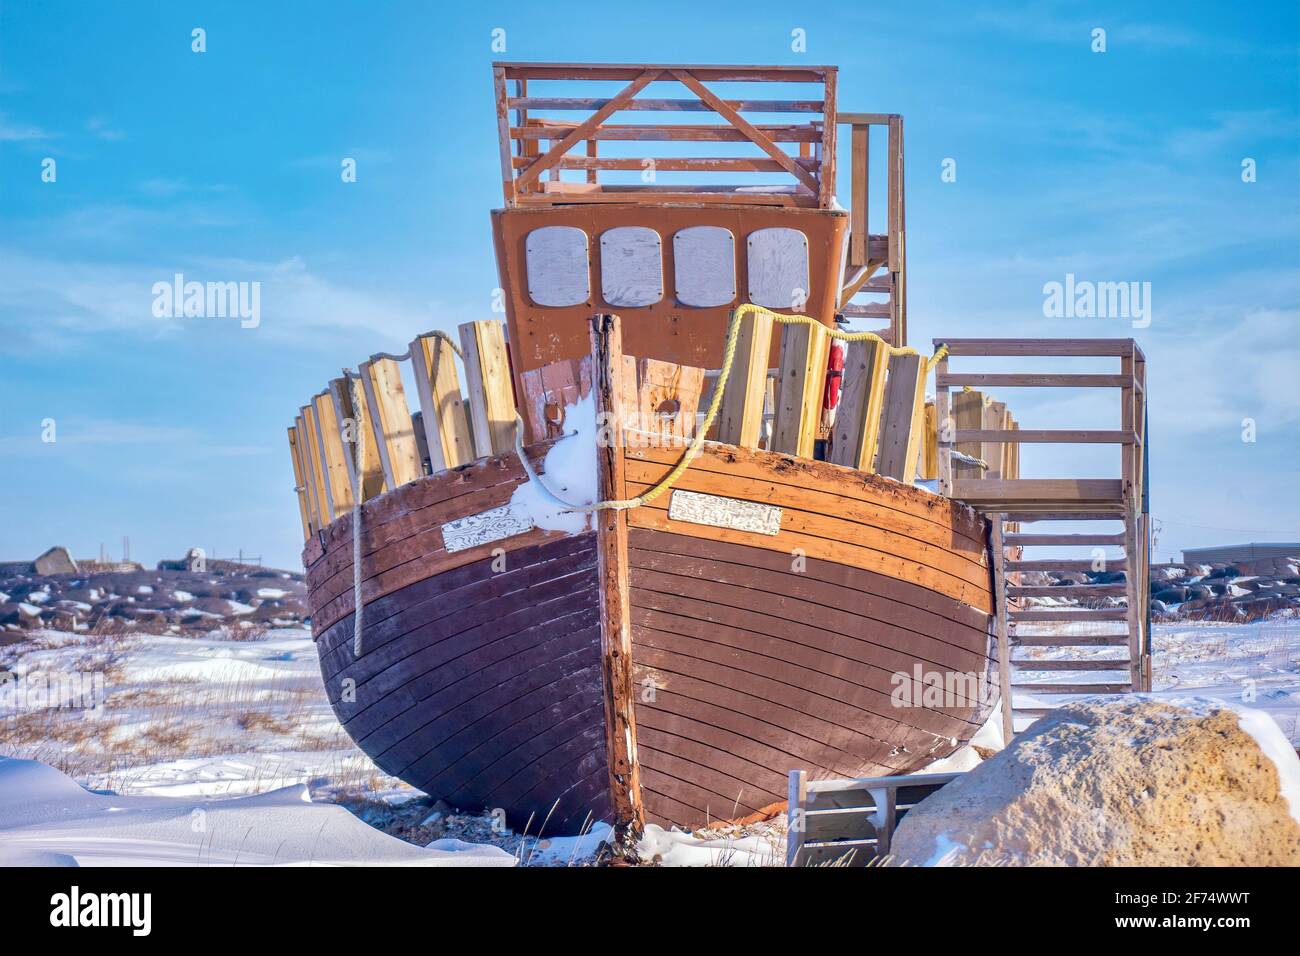 An old wooden boat on display out of the water and in the snow, in a public park in Churchill, Manitoba, Canada. Stock Photo